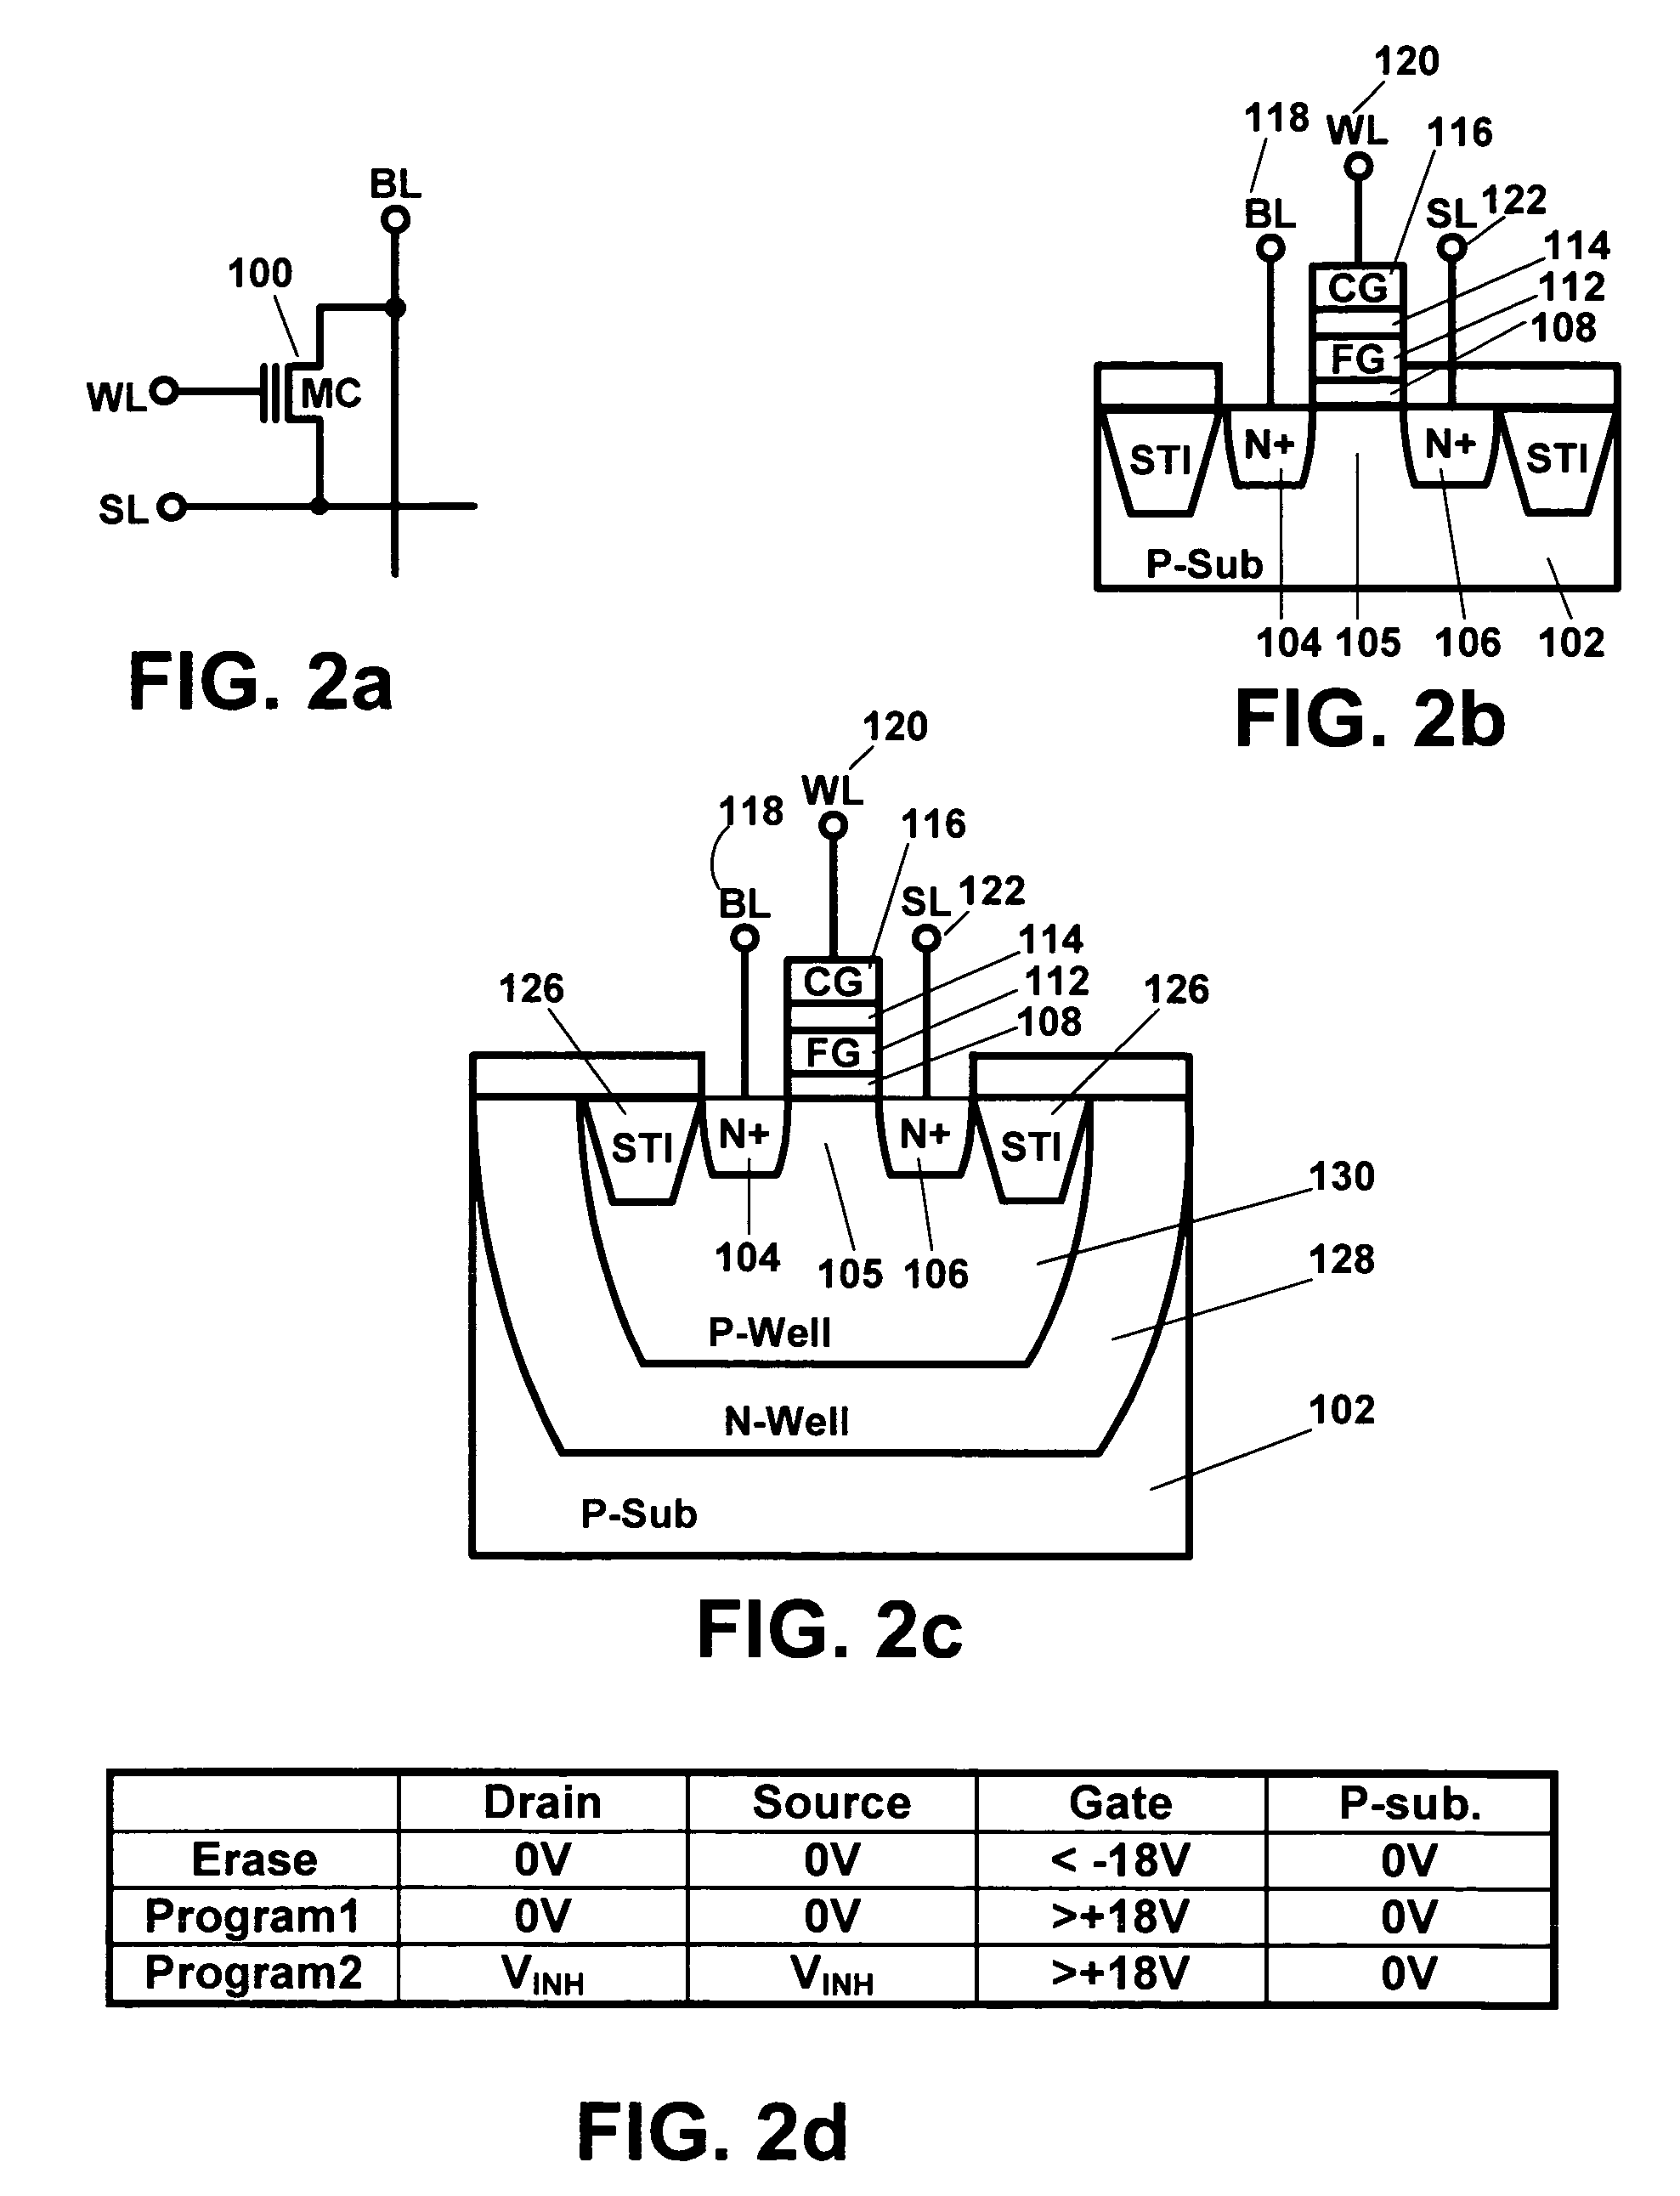 NVRAM memory cell architecture that integrates conventional SRAM and flash cells